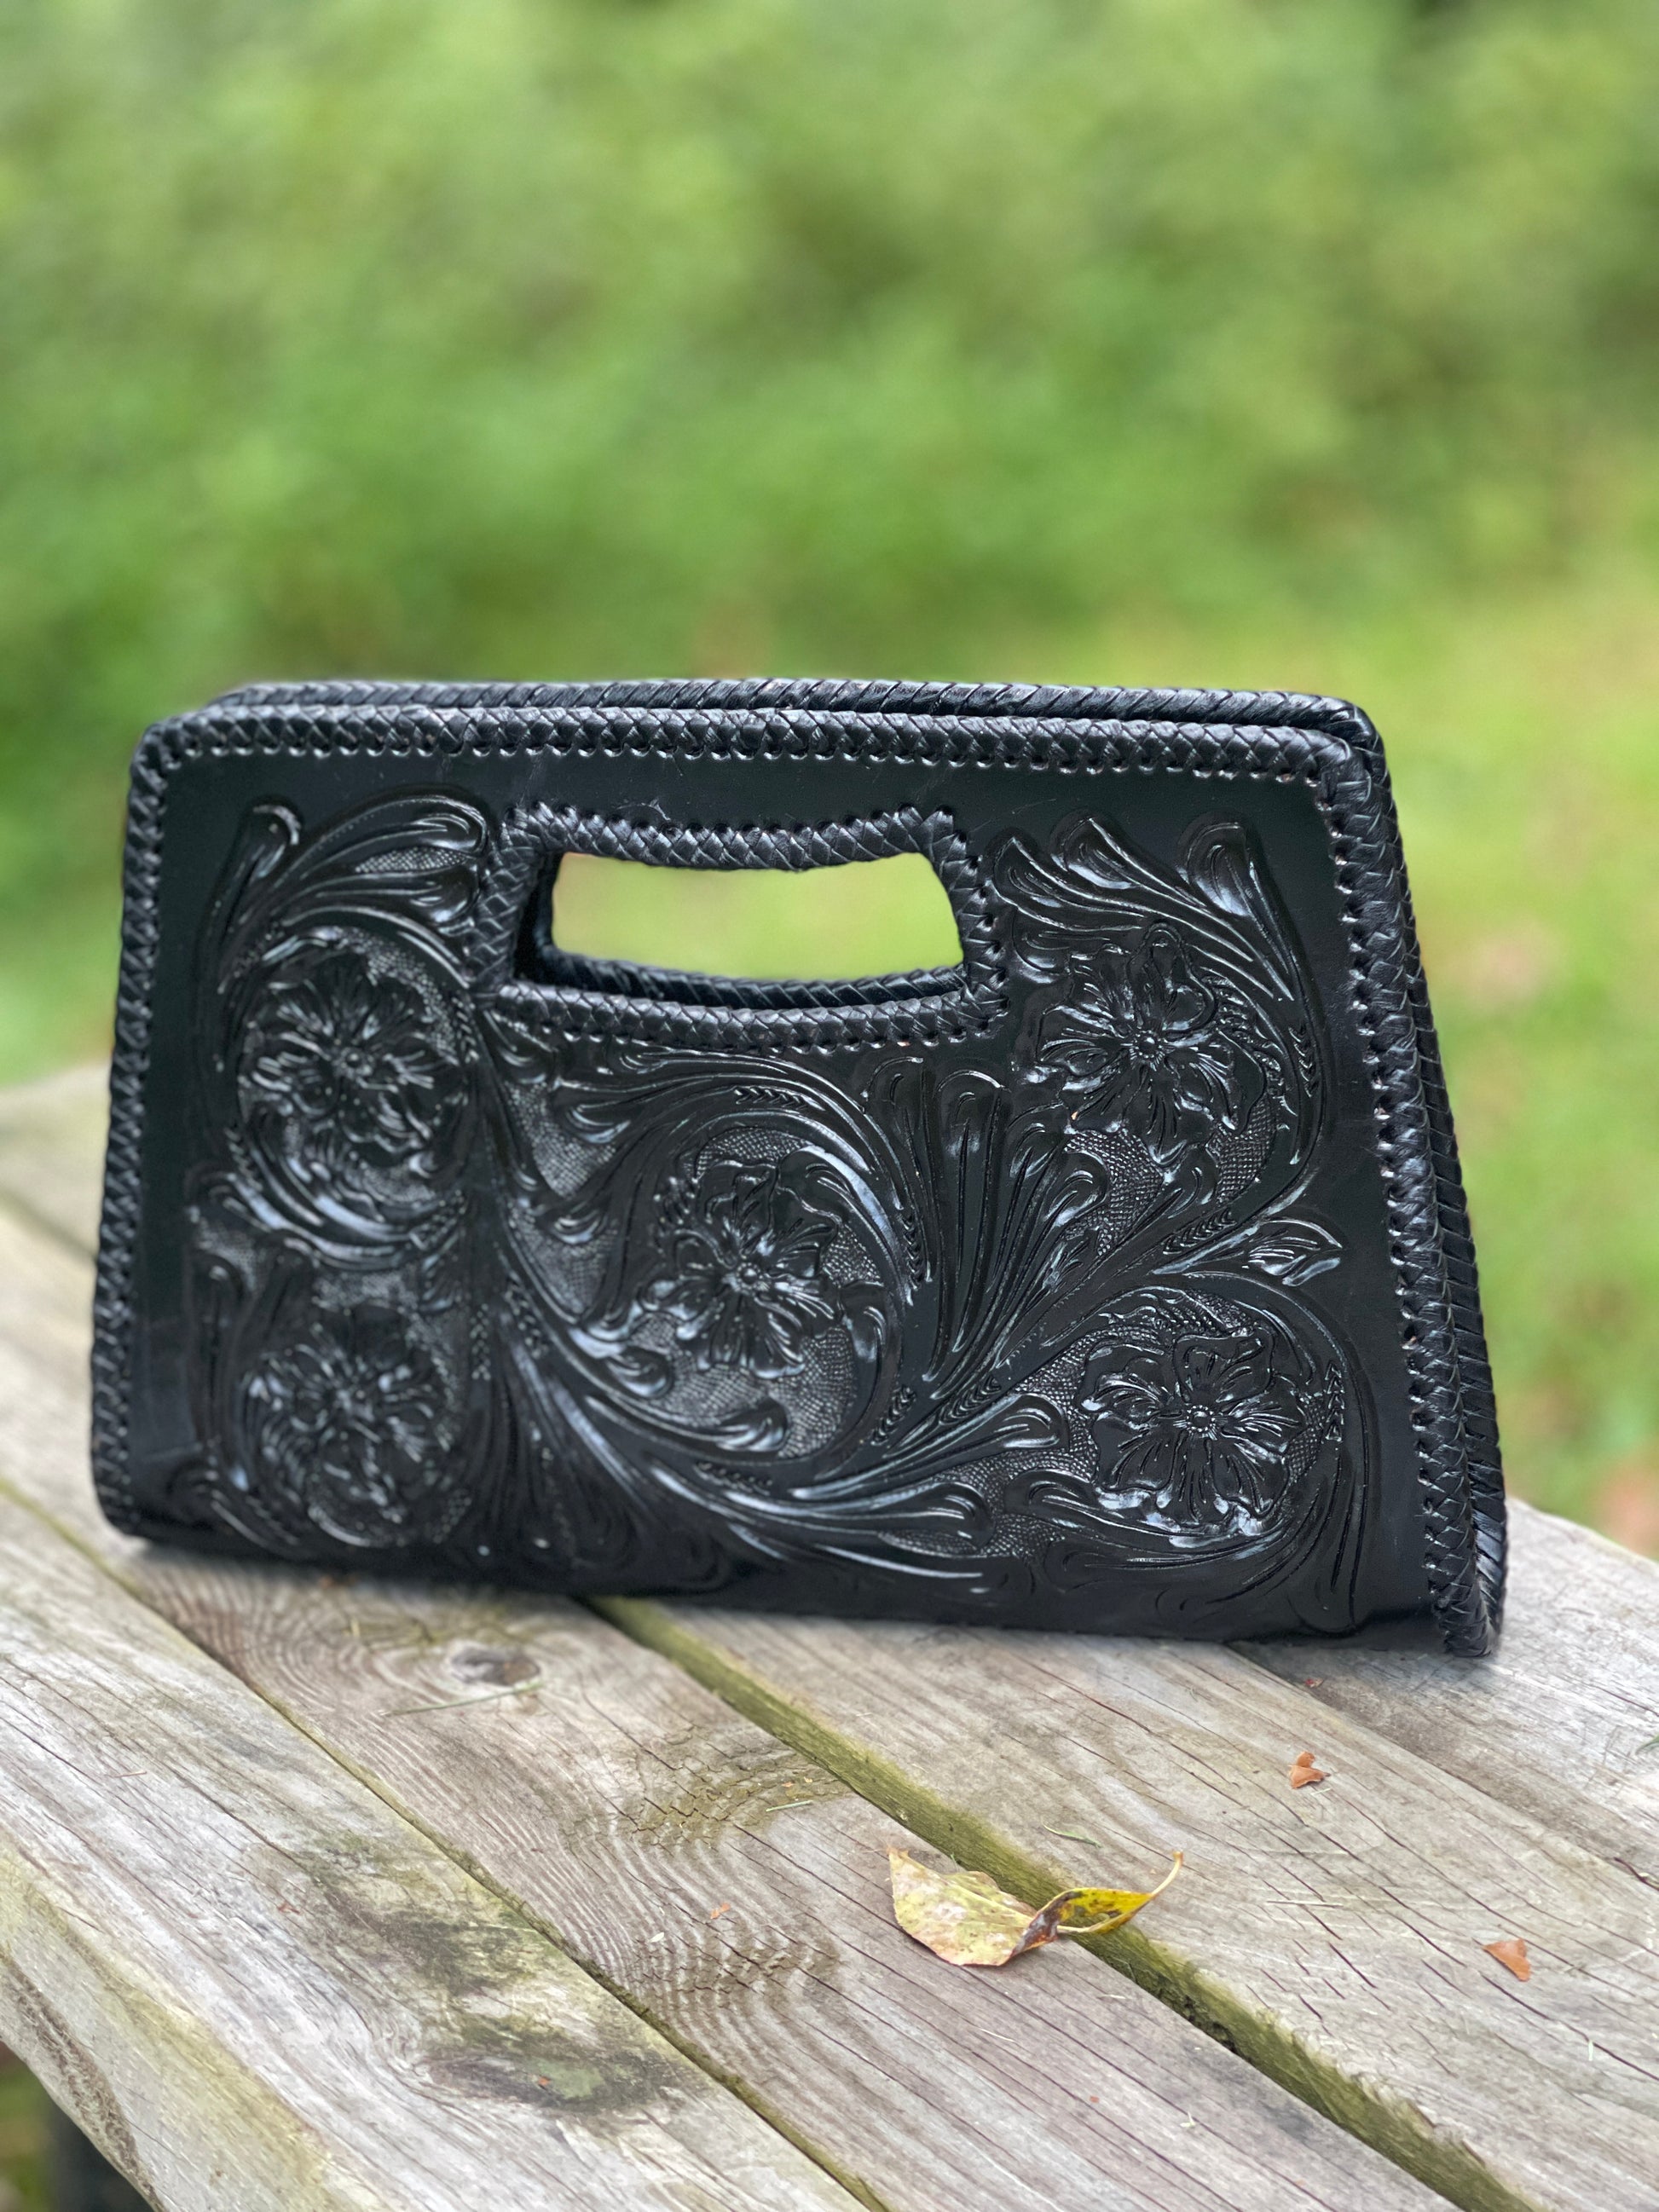 Hand-Tooled Leather Small Clutch, "YENNY" by ALLE - ALLE Handbags